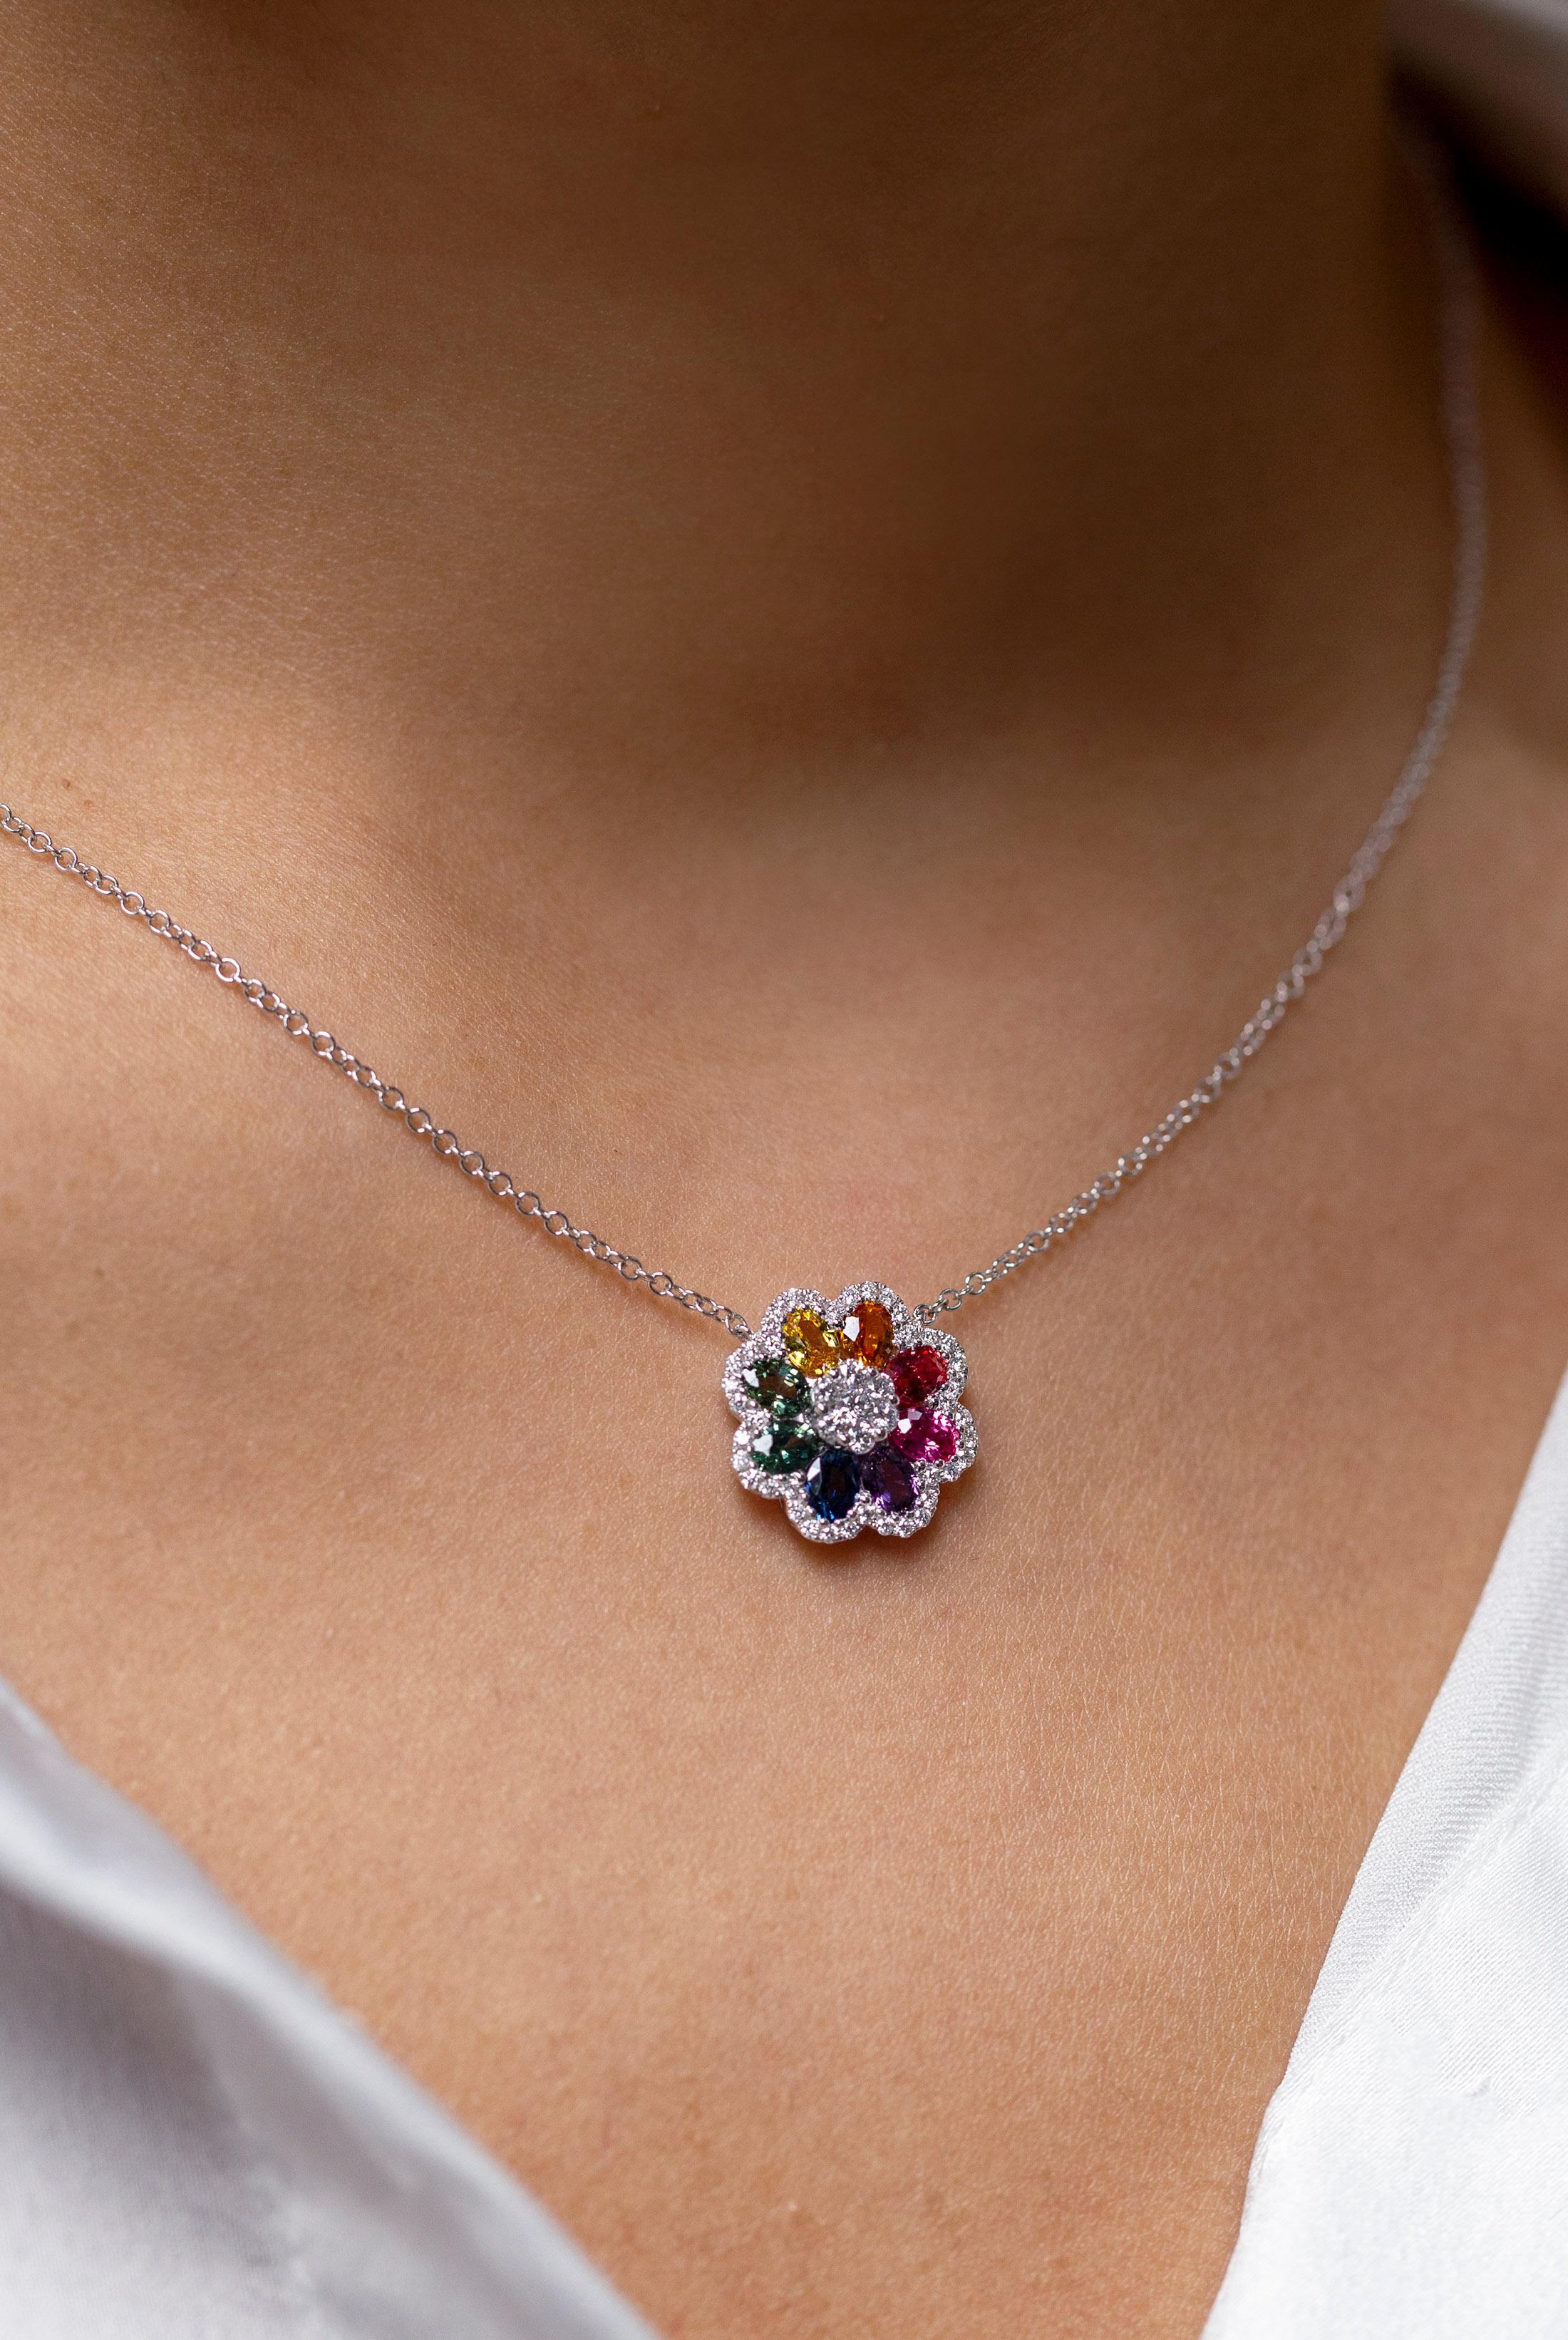 Contemporary 1.65 Total Carat Multi Color Sapphire with Diamond Flower Style Pendant Necklace